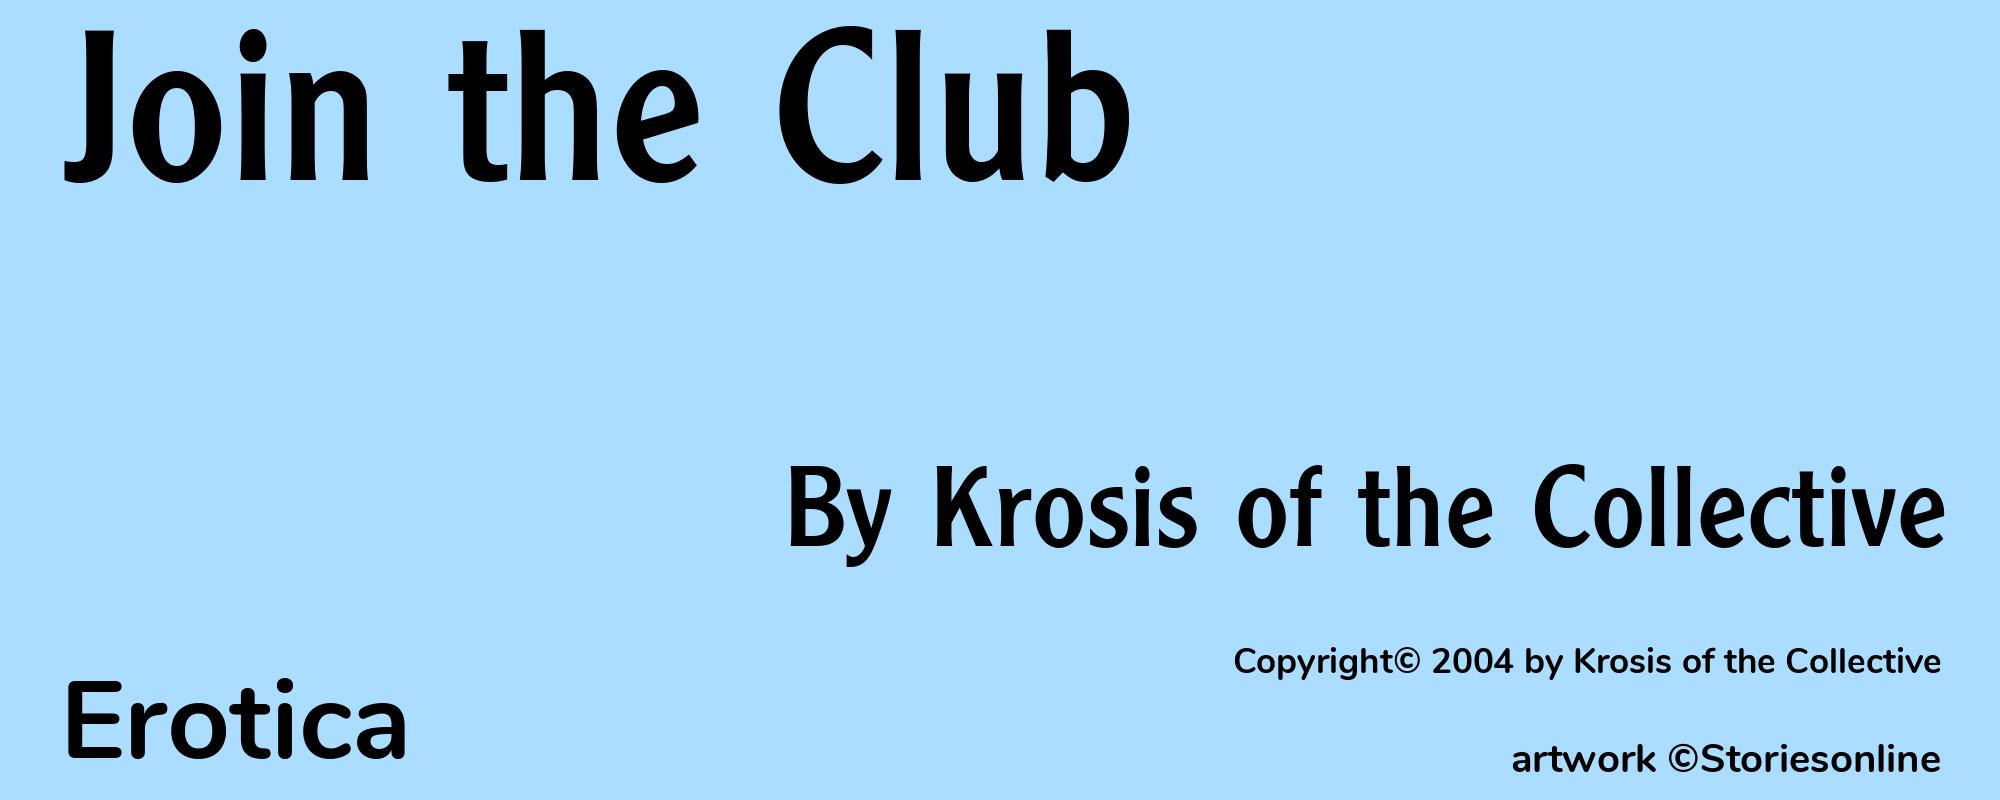 Join the Club - Cover